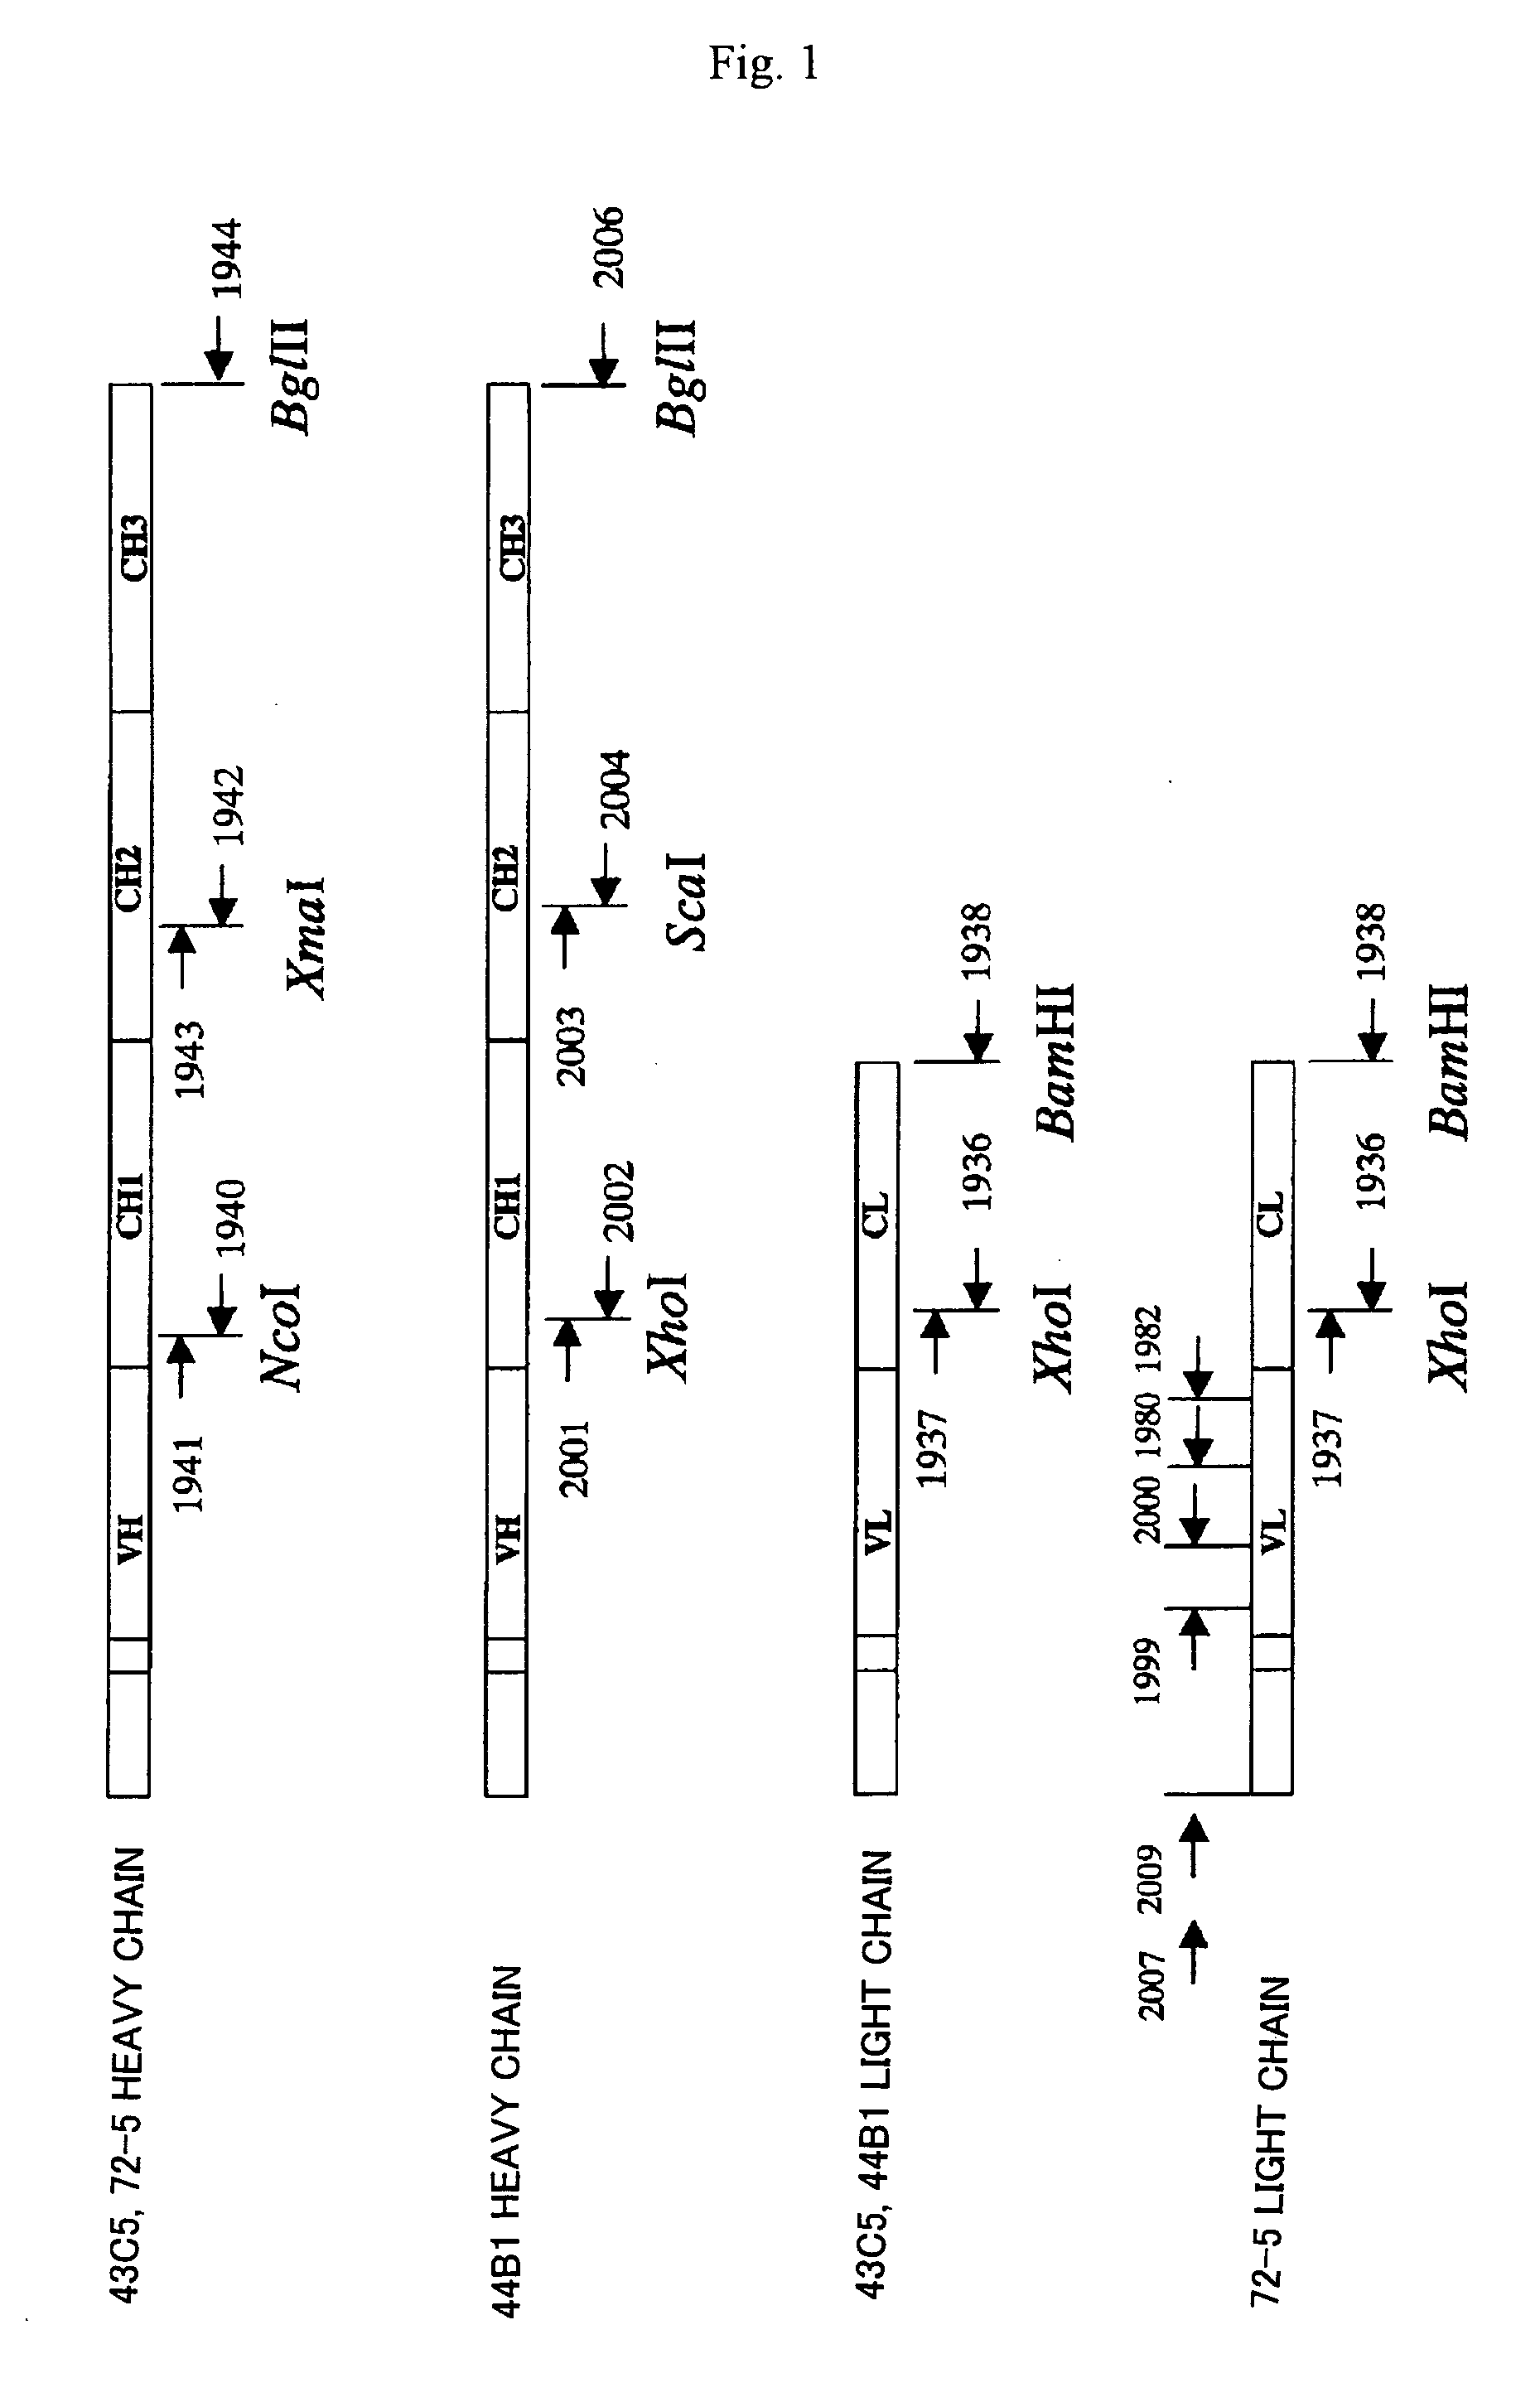 Remedy for prion disease and method of producing the same